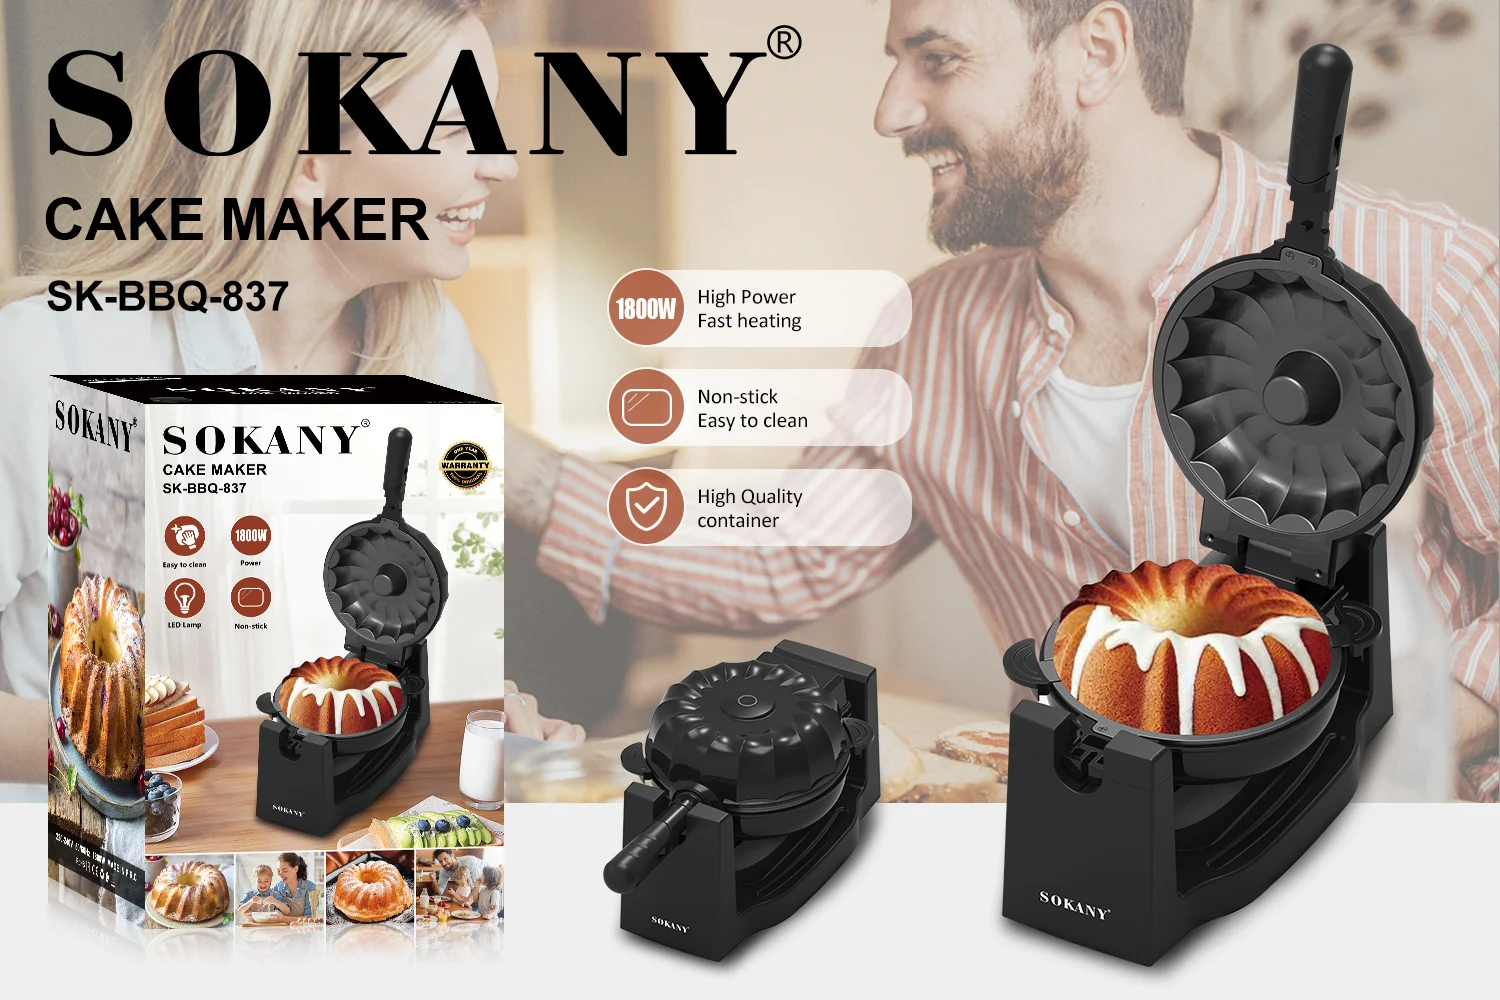 SOKANY 1400W Cookie Maker Machine Various Model Of 13 Hole Stable